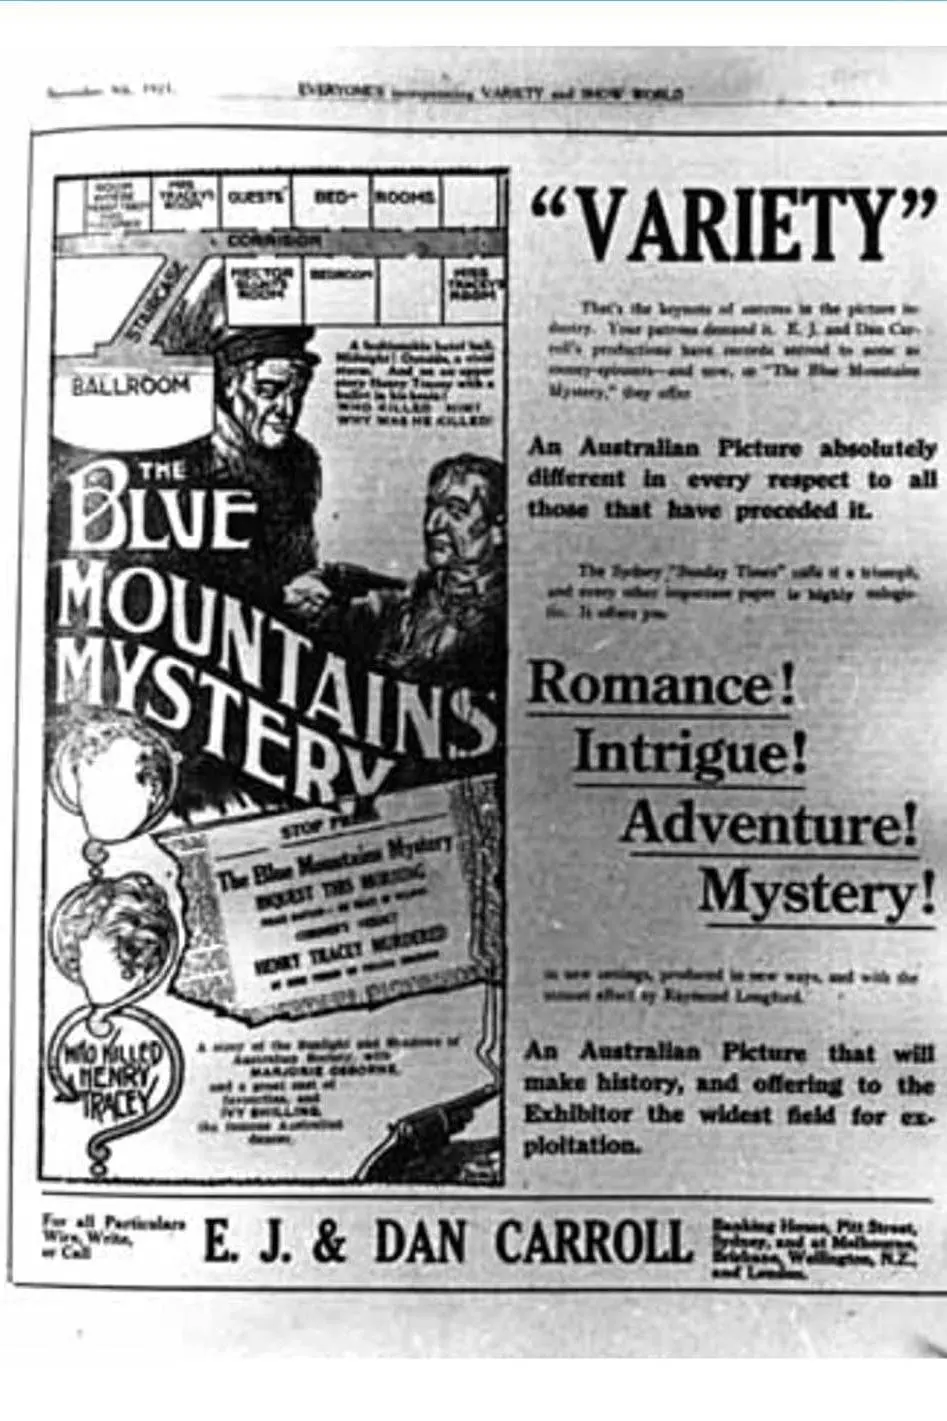 The Blue Mountains Mystery_peliplat